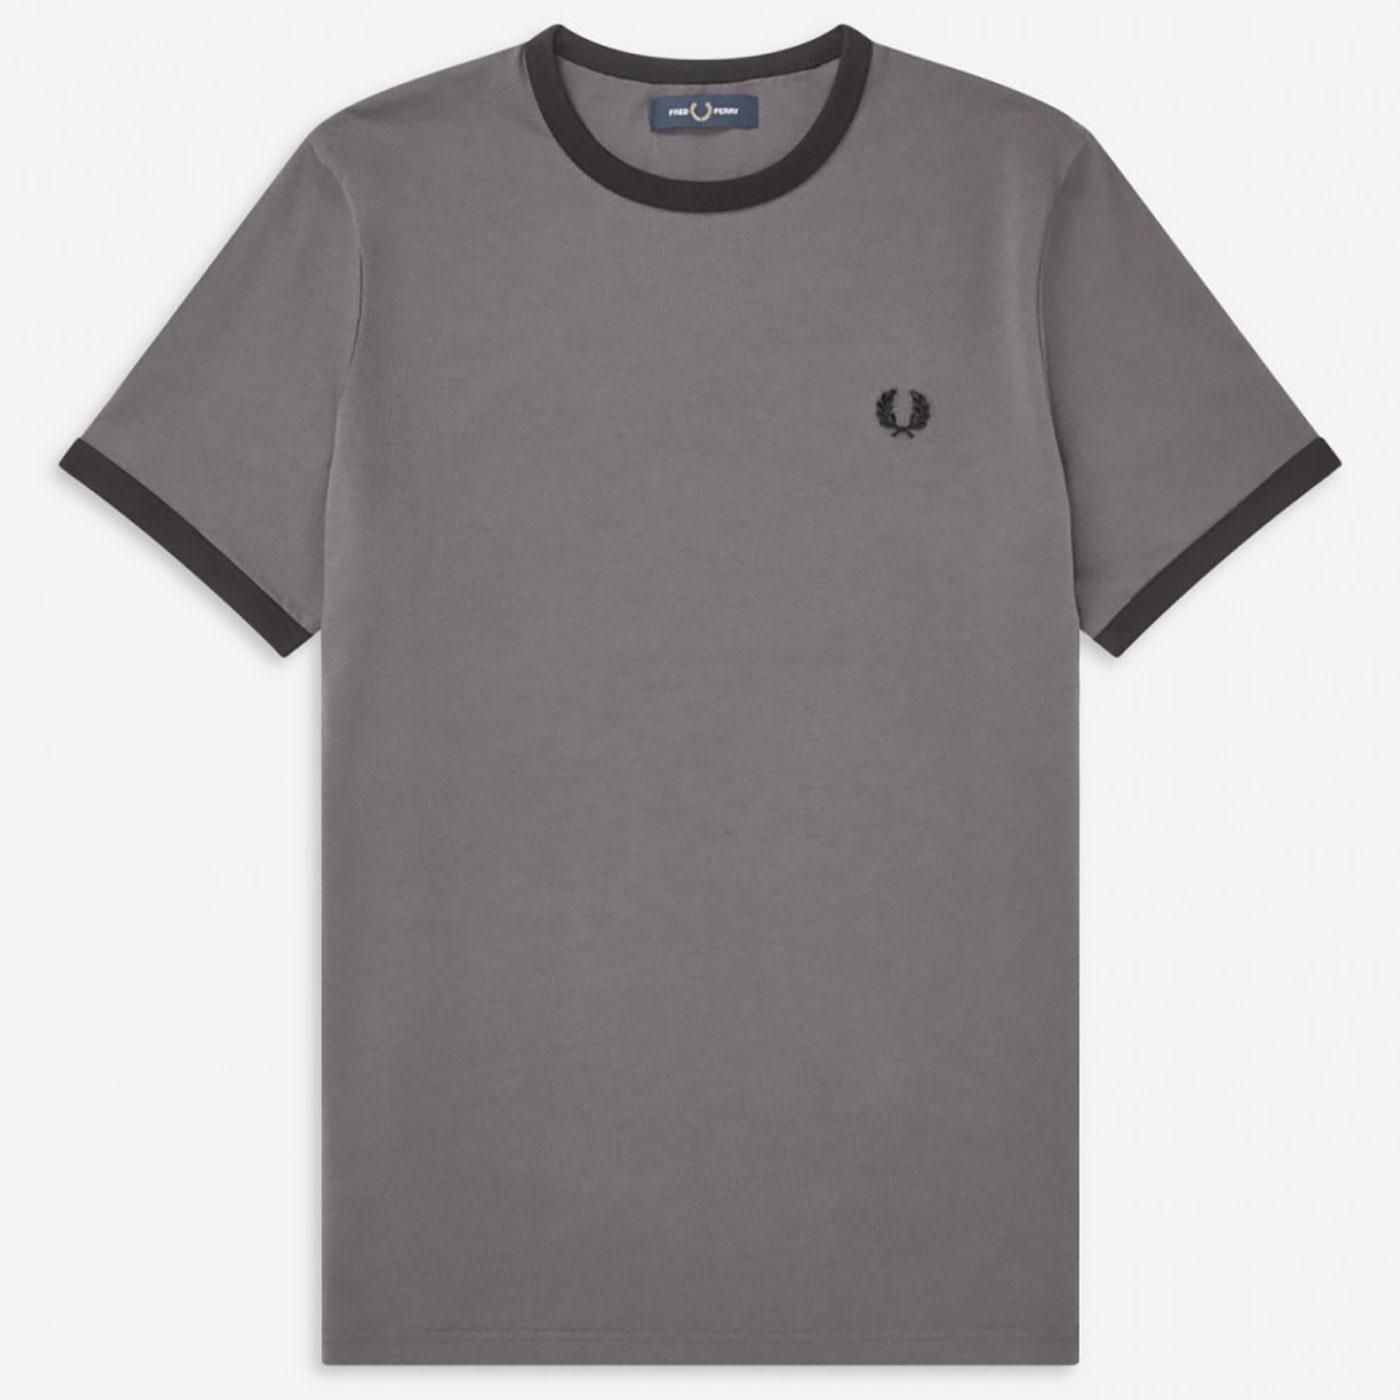 FRED PERRY Mens Retro Mod Ringer Crew Tee in Gunmetal